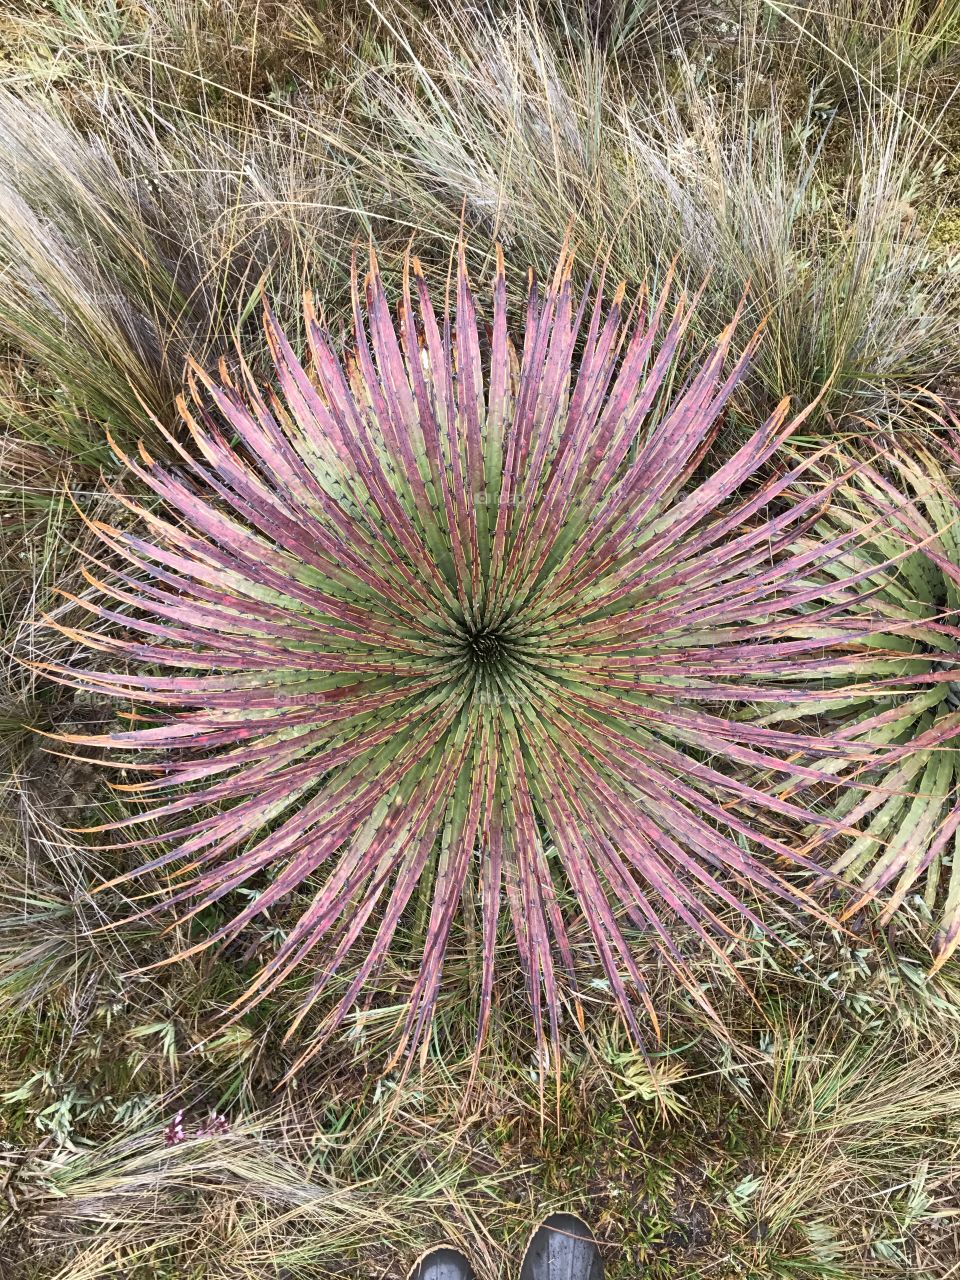 A visually  captivating frame of a common endemic plant in Cajas National Park, Ecuador